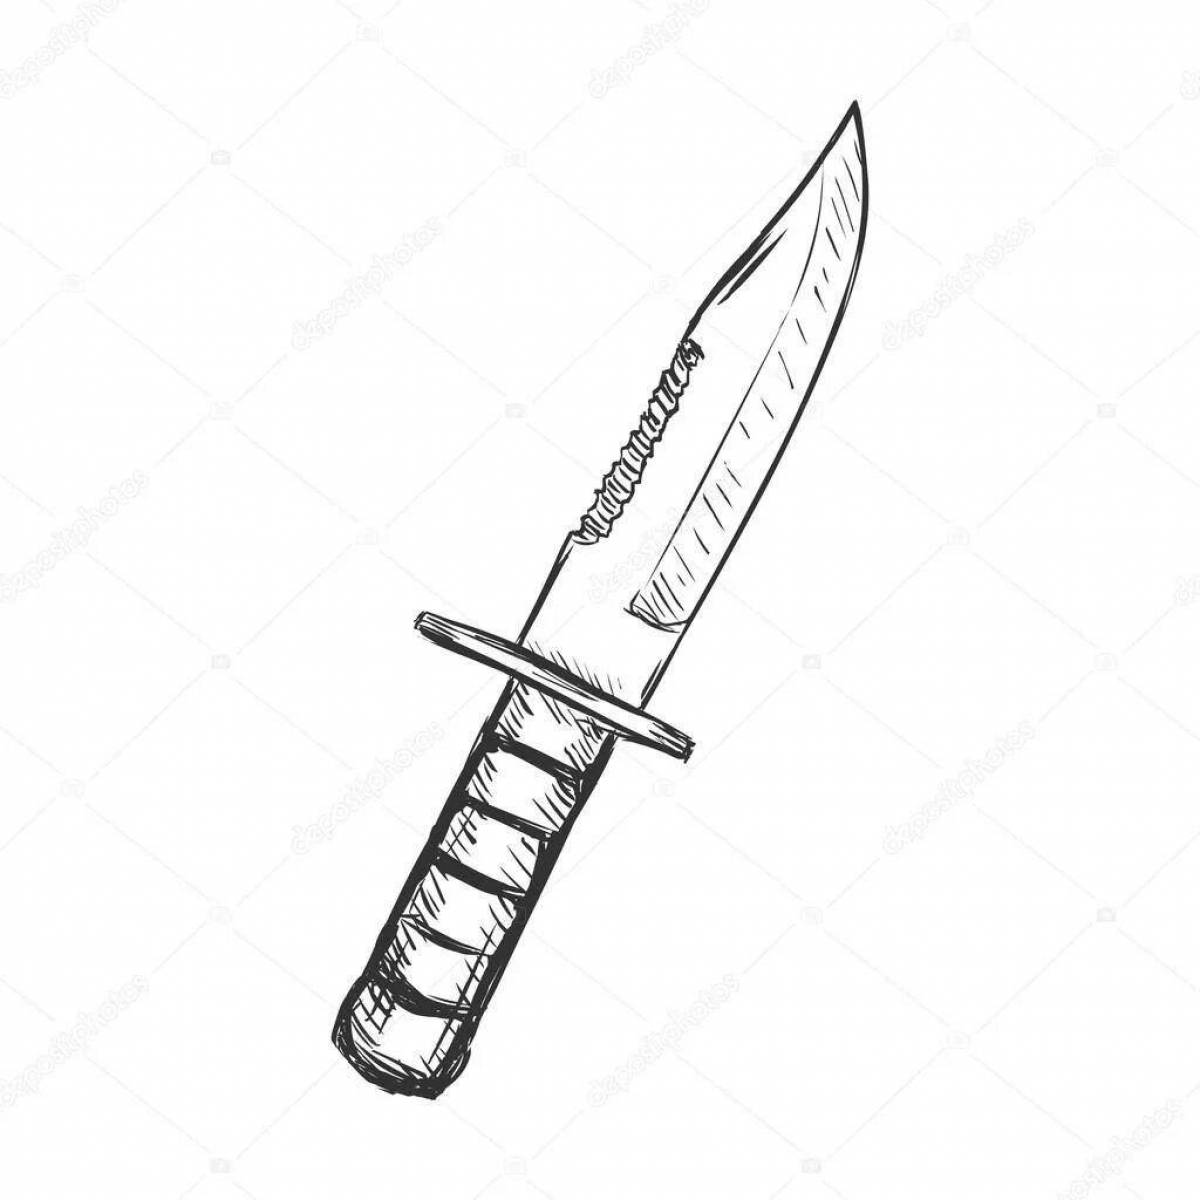 Awesome m9 bayonet coloring page